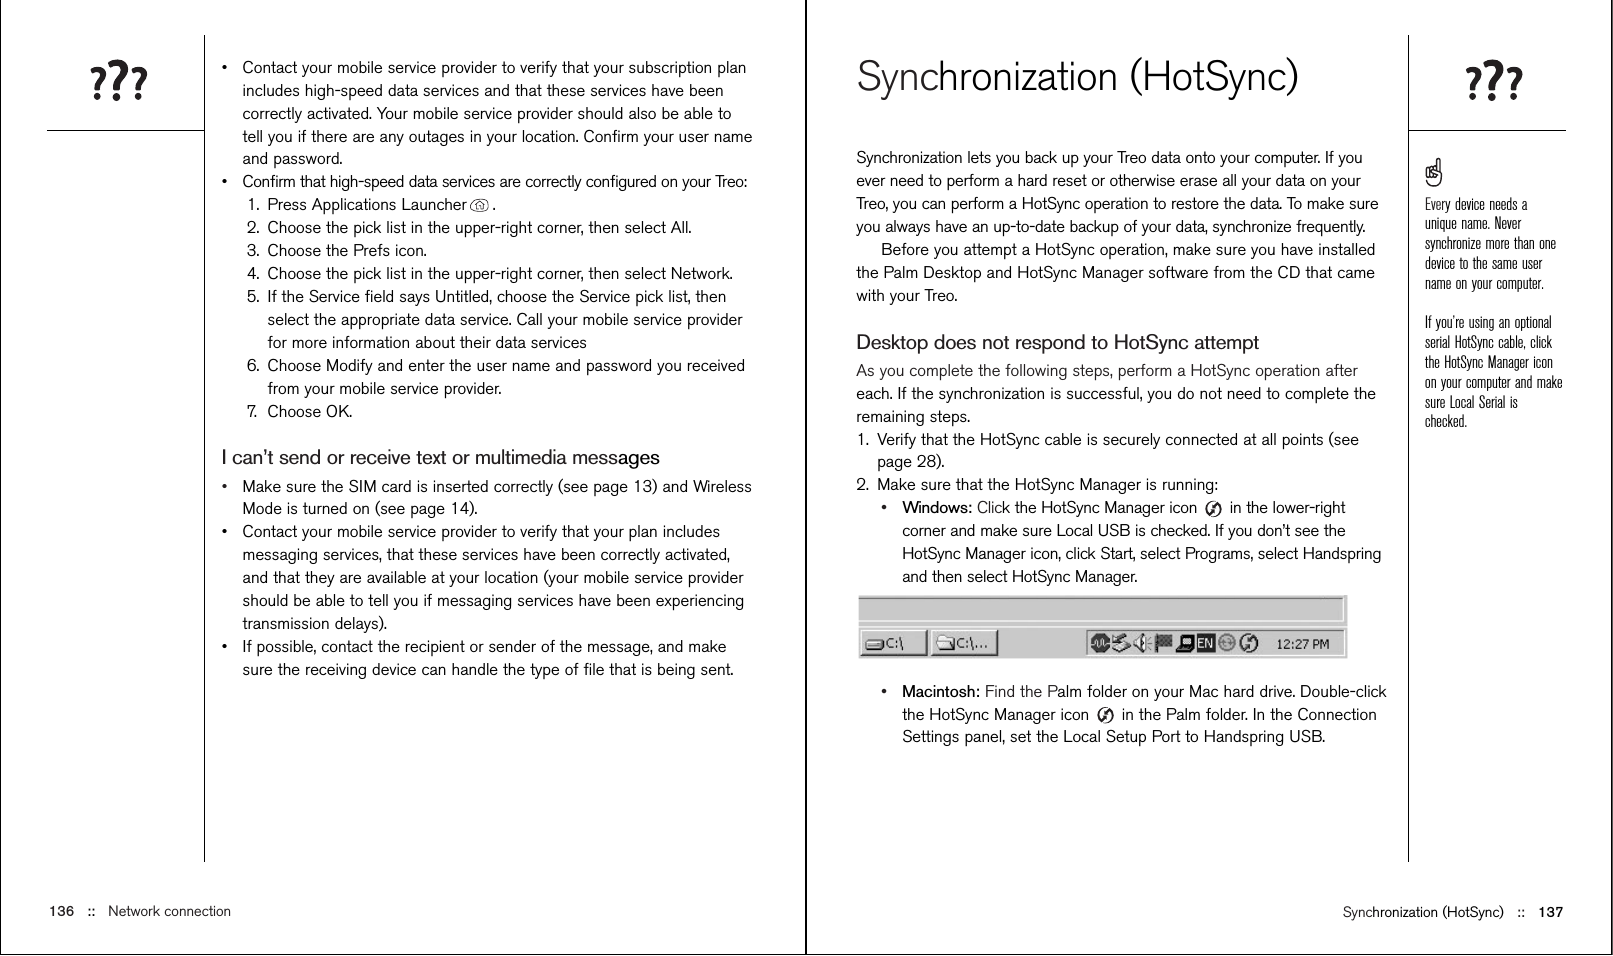 Synchronization (HotSync) ::   137Synchronization (HotSync)Synchronization lets you back up your Treo data onto your computer. If youever need to perform a hard reset or otherwise erase all your data on yourTreo, you can perform a HotSync operation to restore the data. To make sureyou always have an up-to-date backup of your data, synchronize frequently.Before you attempt a HotSync operation, make sure you have installedthe Palm Desktop and HotSync Manager software from the CD that camewith your Treo.Desktop does not respond to HotSync attemptAs you complete the following steps, perform a HotSync operation aftereach. If the synchronization is successful, you do not need to complete theremaining steps.  1. Verify that the HotSync cable is securely connected at all points (seepage 28).2. Make sure that the HotSync Manager is running:•Windows: Click the HotSync Manager icon  in the lower-rightcorner and make sure Local USB is checked. If you don’t see theHotSync Manager icon, click Start, select Programs, select Handspringand then select HotSync Manager.•Macintosh: Find the Palm folder on your Mac hard drive. Double-clickthe HotSync Manager icon in the Palm folder. In the ConnectionSettings panel, set the Local Setup Port to Handspring USB.•Contact your mobile service provider to verify that your subscription planincludes high-speed data services and that these services have beencorrectly activated. Your mobile service provider should also be able totell you if there are any outages in your location. Conﬁrm your user nameand password.•Conﬁrm that high-speed data services are correctly conﬁgured on your Treo:1. Press Applications Launcher .2. Choose the pick list in the upper-right corner, then select All.3. Choose the Prefs icon.4.  Choose the pick list in the upper-right corner, then select Network.5. If the Service ﬁeld says Untitled, choose the Service pick list, thenselect the appropriate data service. Call your mobile service providerfor more information about their data services6. Choose Modify and enter the user name and password you receivedfrom your mobile service provider.7. Choose OK.I can’t send or receive text or multimedia messages•Make sure the SIM card is inserted correctly (see page 13) and WirelessMode is turned on (see page 14).•Contact your mobile service provider to verify that your plan includesmessaging services, that these services have been correctly activated,and that they are available at your location (your mobile service providershould be able to tell you if messaging services have been experiencingtransmission delays).•If possible, contact the recipient or sender of the message, and makesure the receiving device can handle the type of ﬁle that is being sent.136 ::   Network connectionEvery device needs aunique name. Neversynchronize more than onedevice to the same username on your computer.If you’re using an optionalserial HotSync cable, clickthe HotSync Manager iconon your computer and makesure Local Serial ischecked.